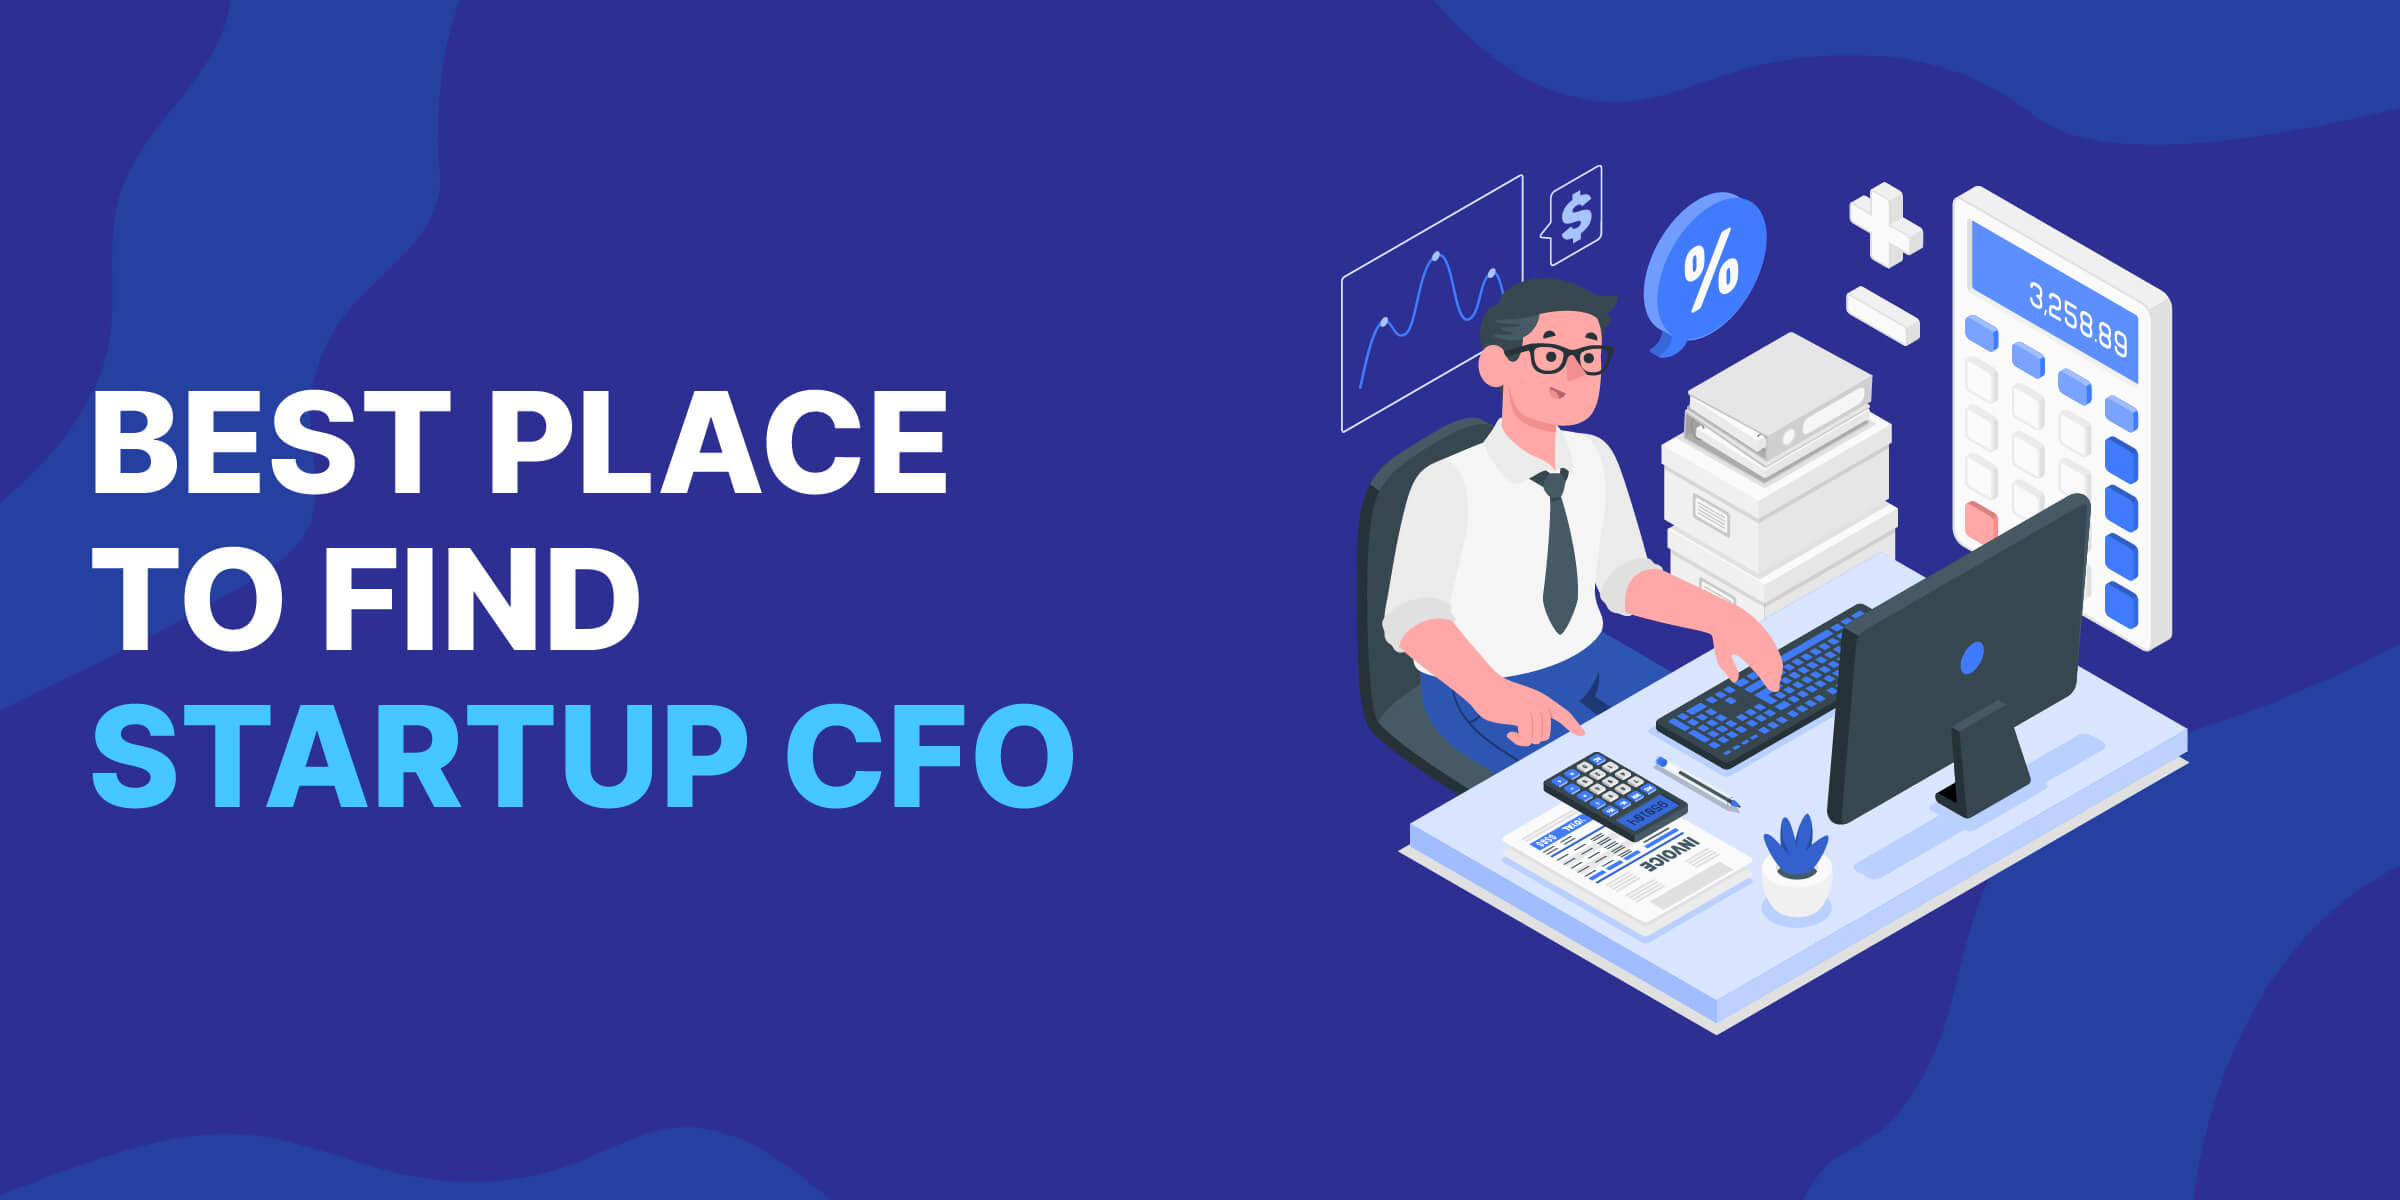 Best Place to Find Startup CFO